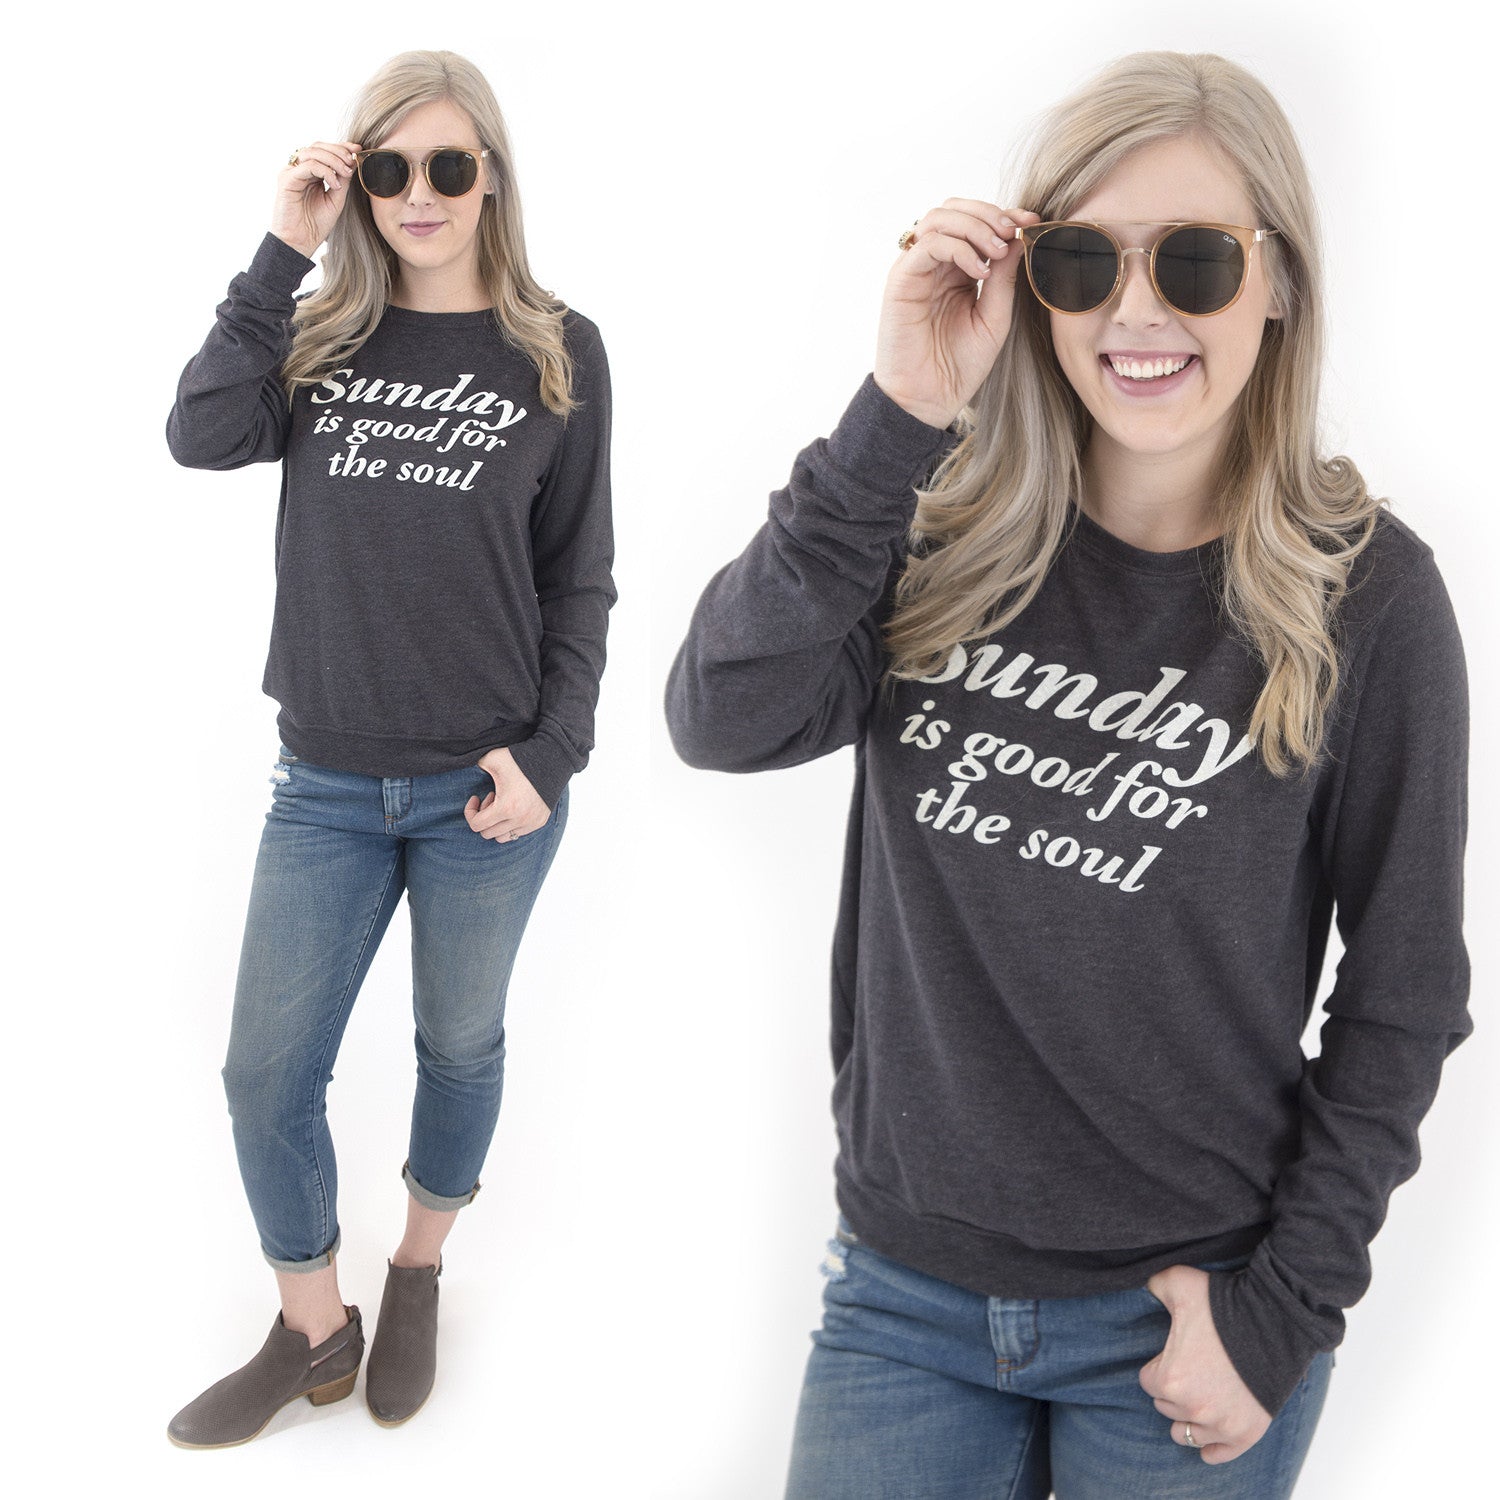 Sundays are good for the soul Christian graphic sweatshirt at Eccentrics Boutique